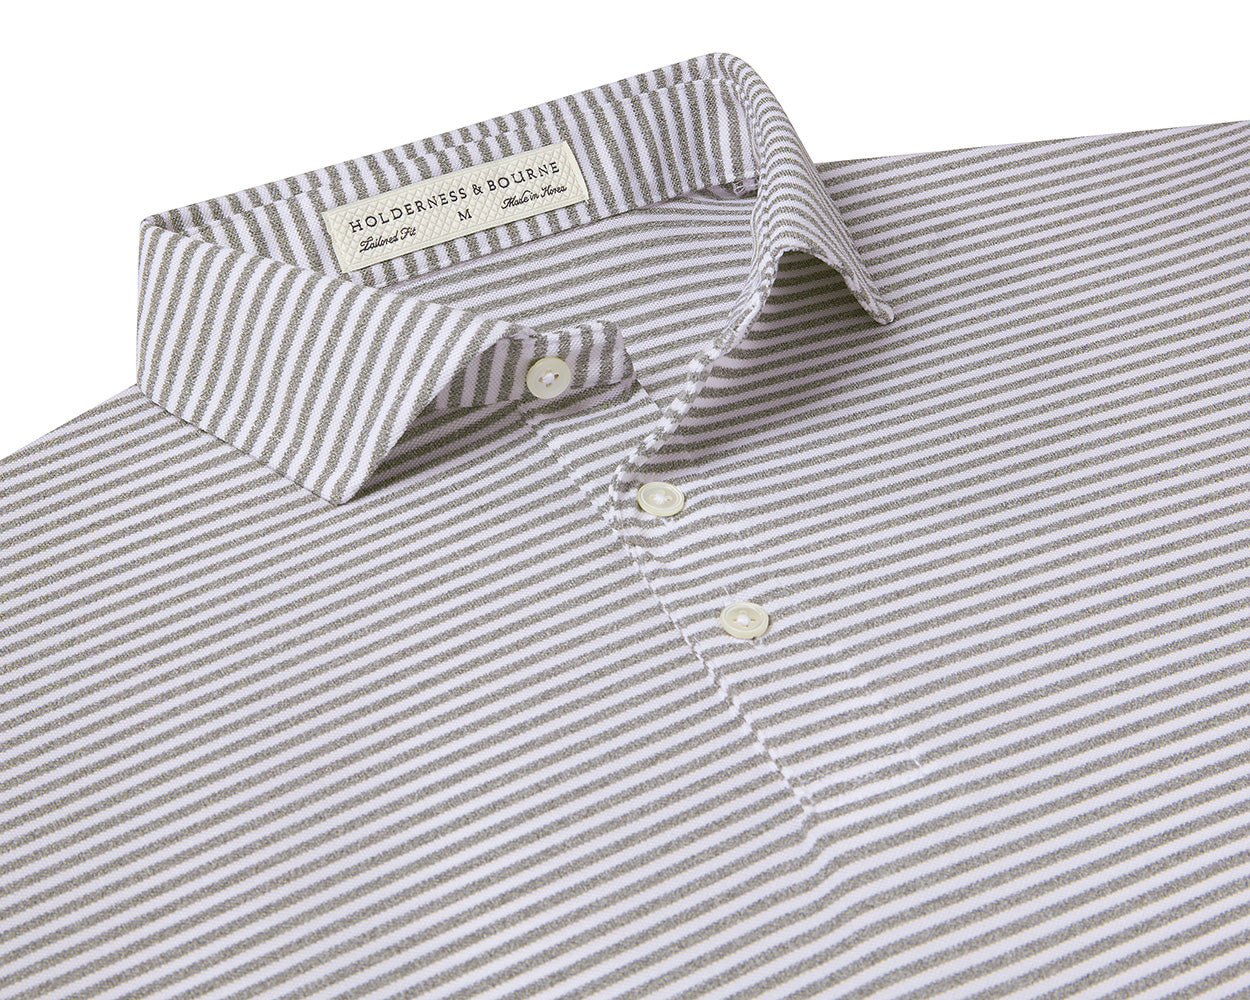 Folded Holderness and Bourne gray and white shirt.